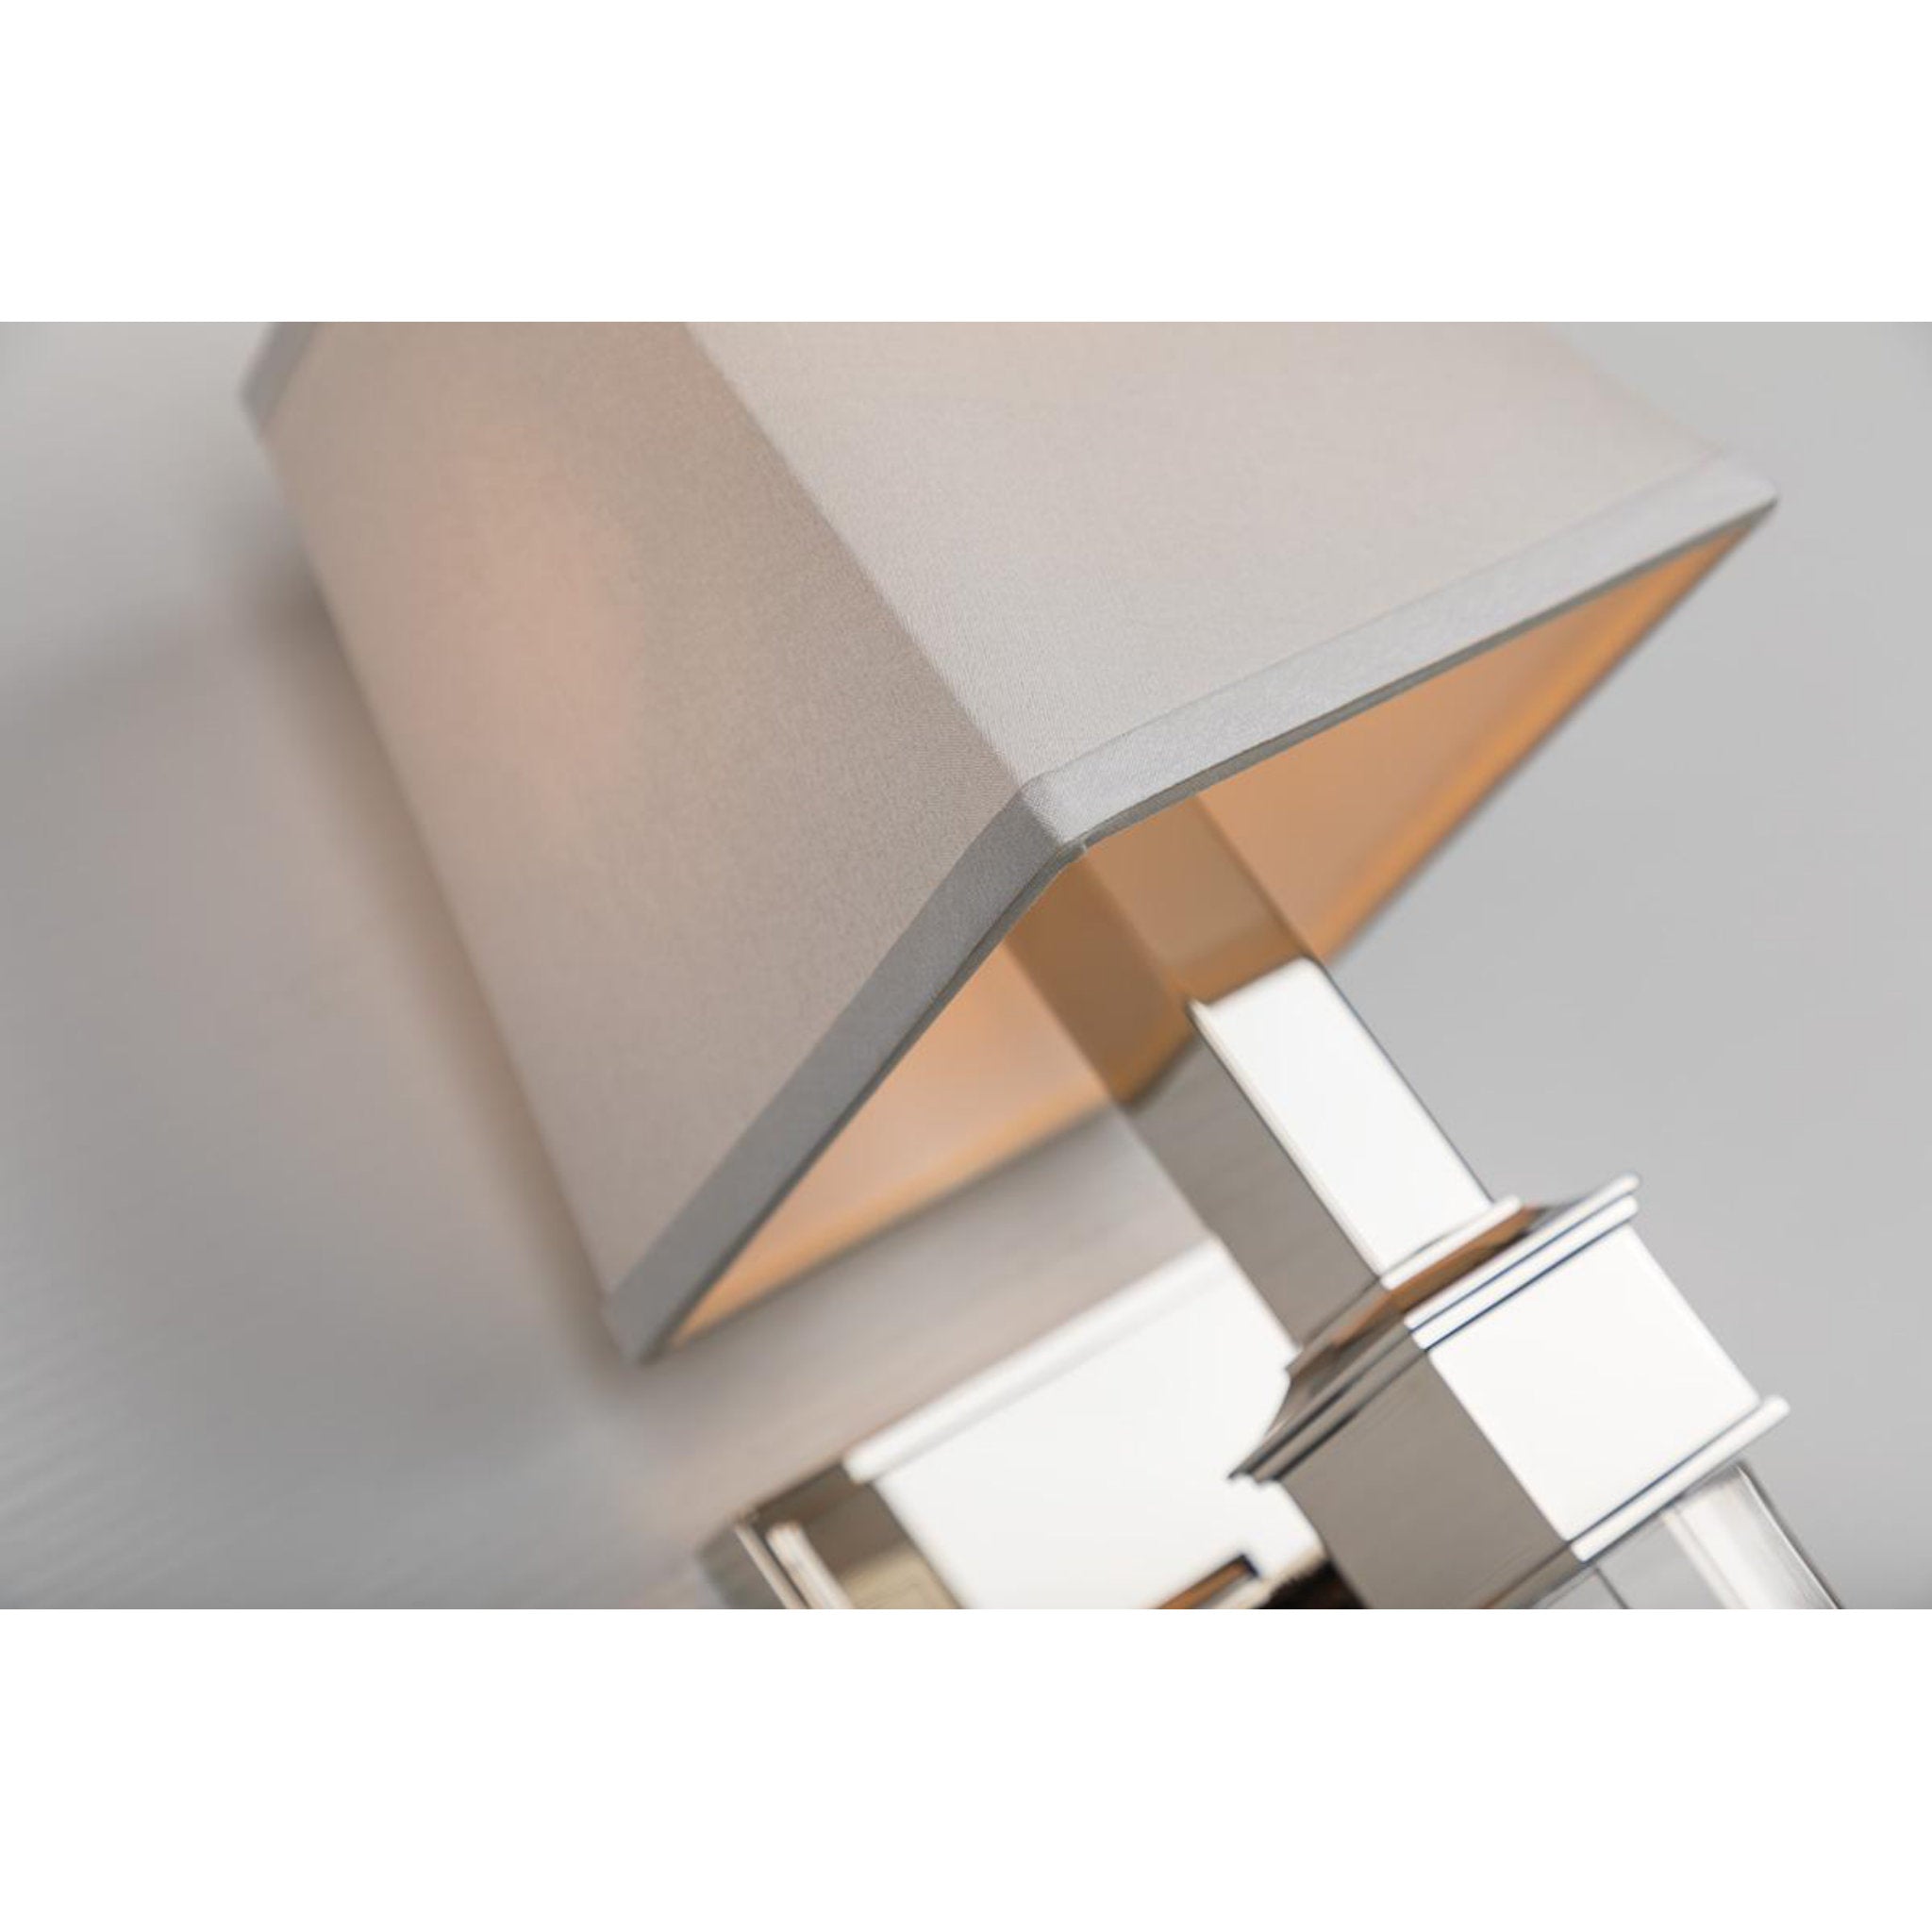 Ruskin 1 Light Wall Sconce in Aged Brass